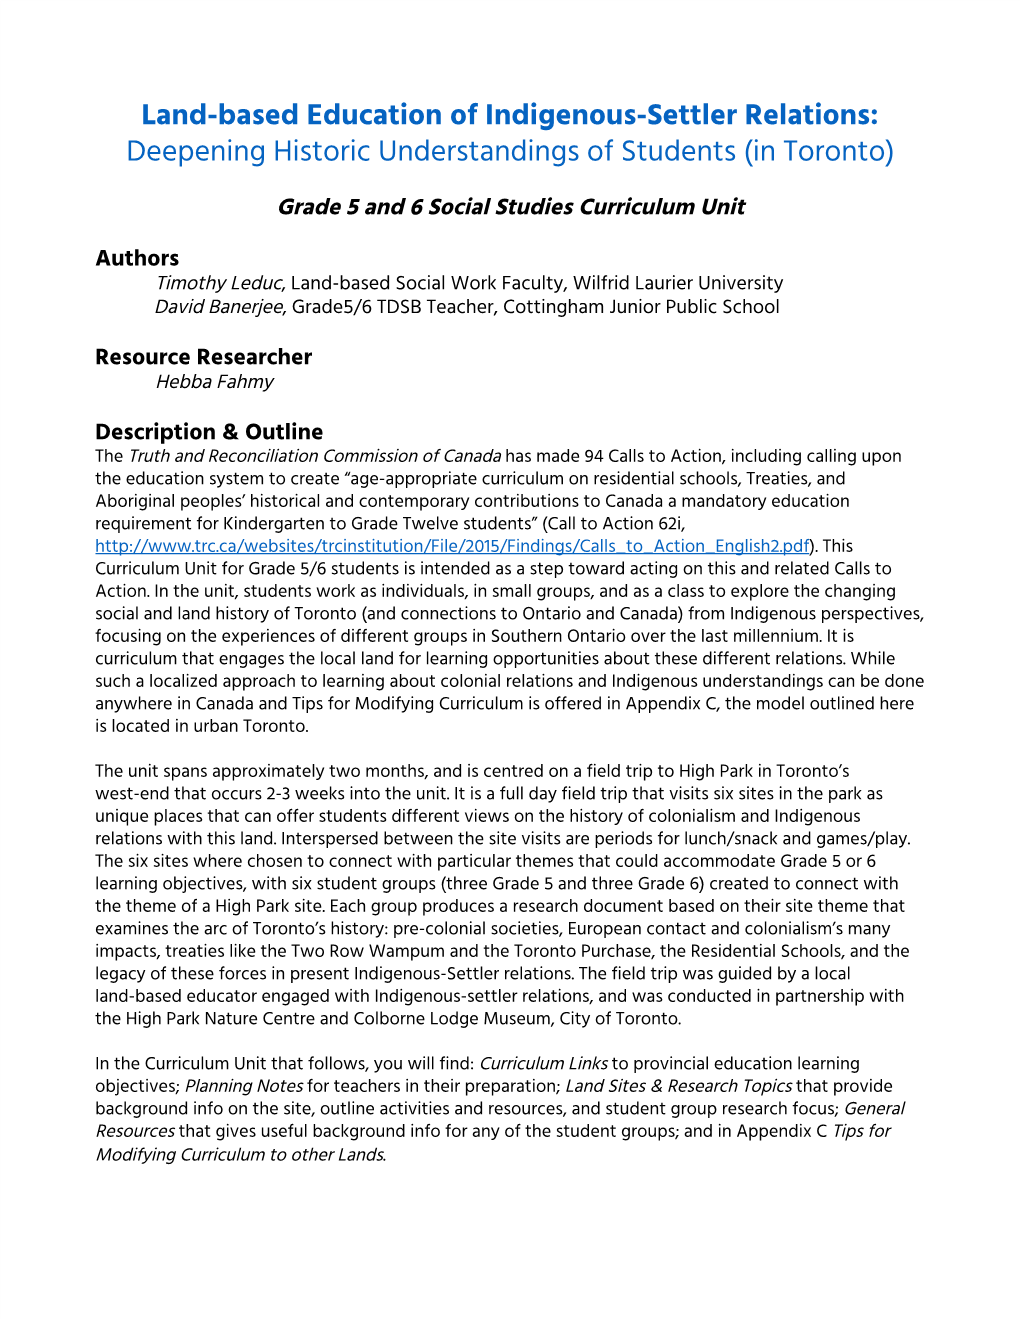 Land-Based Education of Indigenous-Settler Relations: Deepening Historic Understandings of Students (In Toronto)